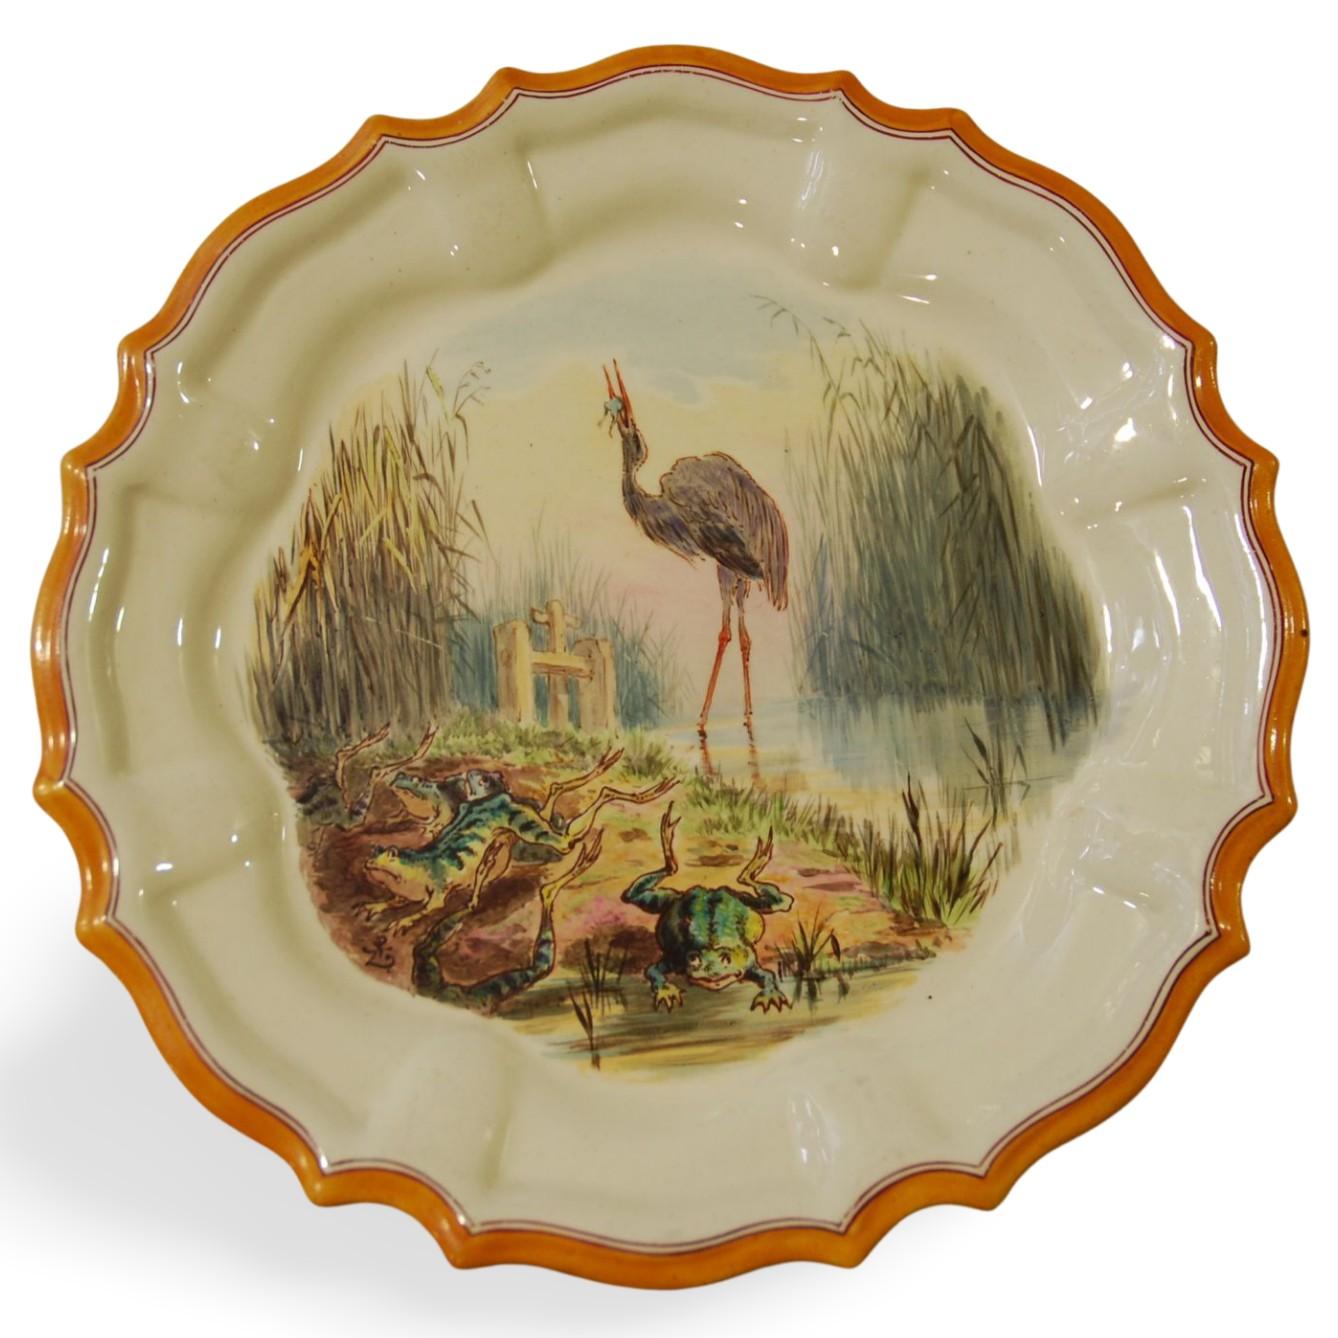 Set of 12 Plates, Aesop Fables, Wedgwood, circa 1860 For Sale 8